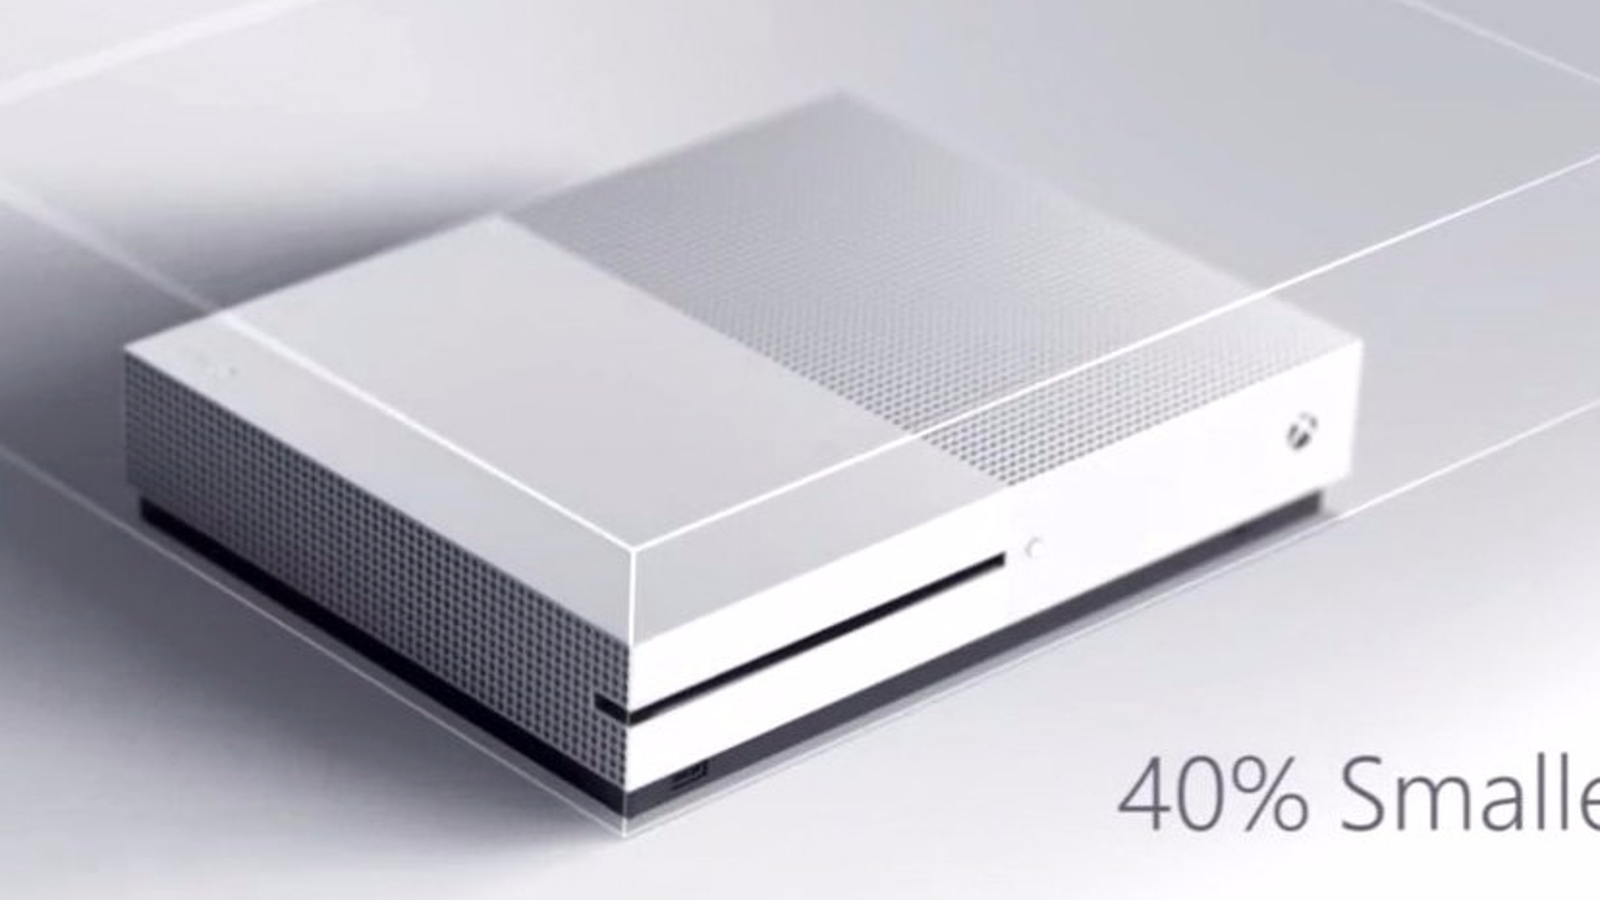 mager Glimlach lunch Microsoft announces the Xbox One S price and release date | Eurogamer.net